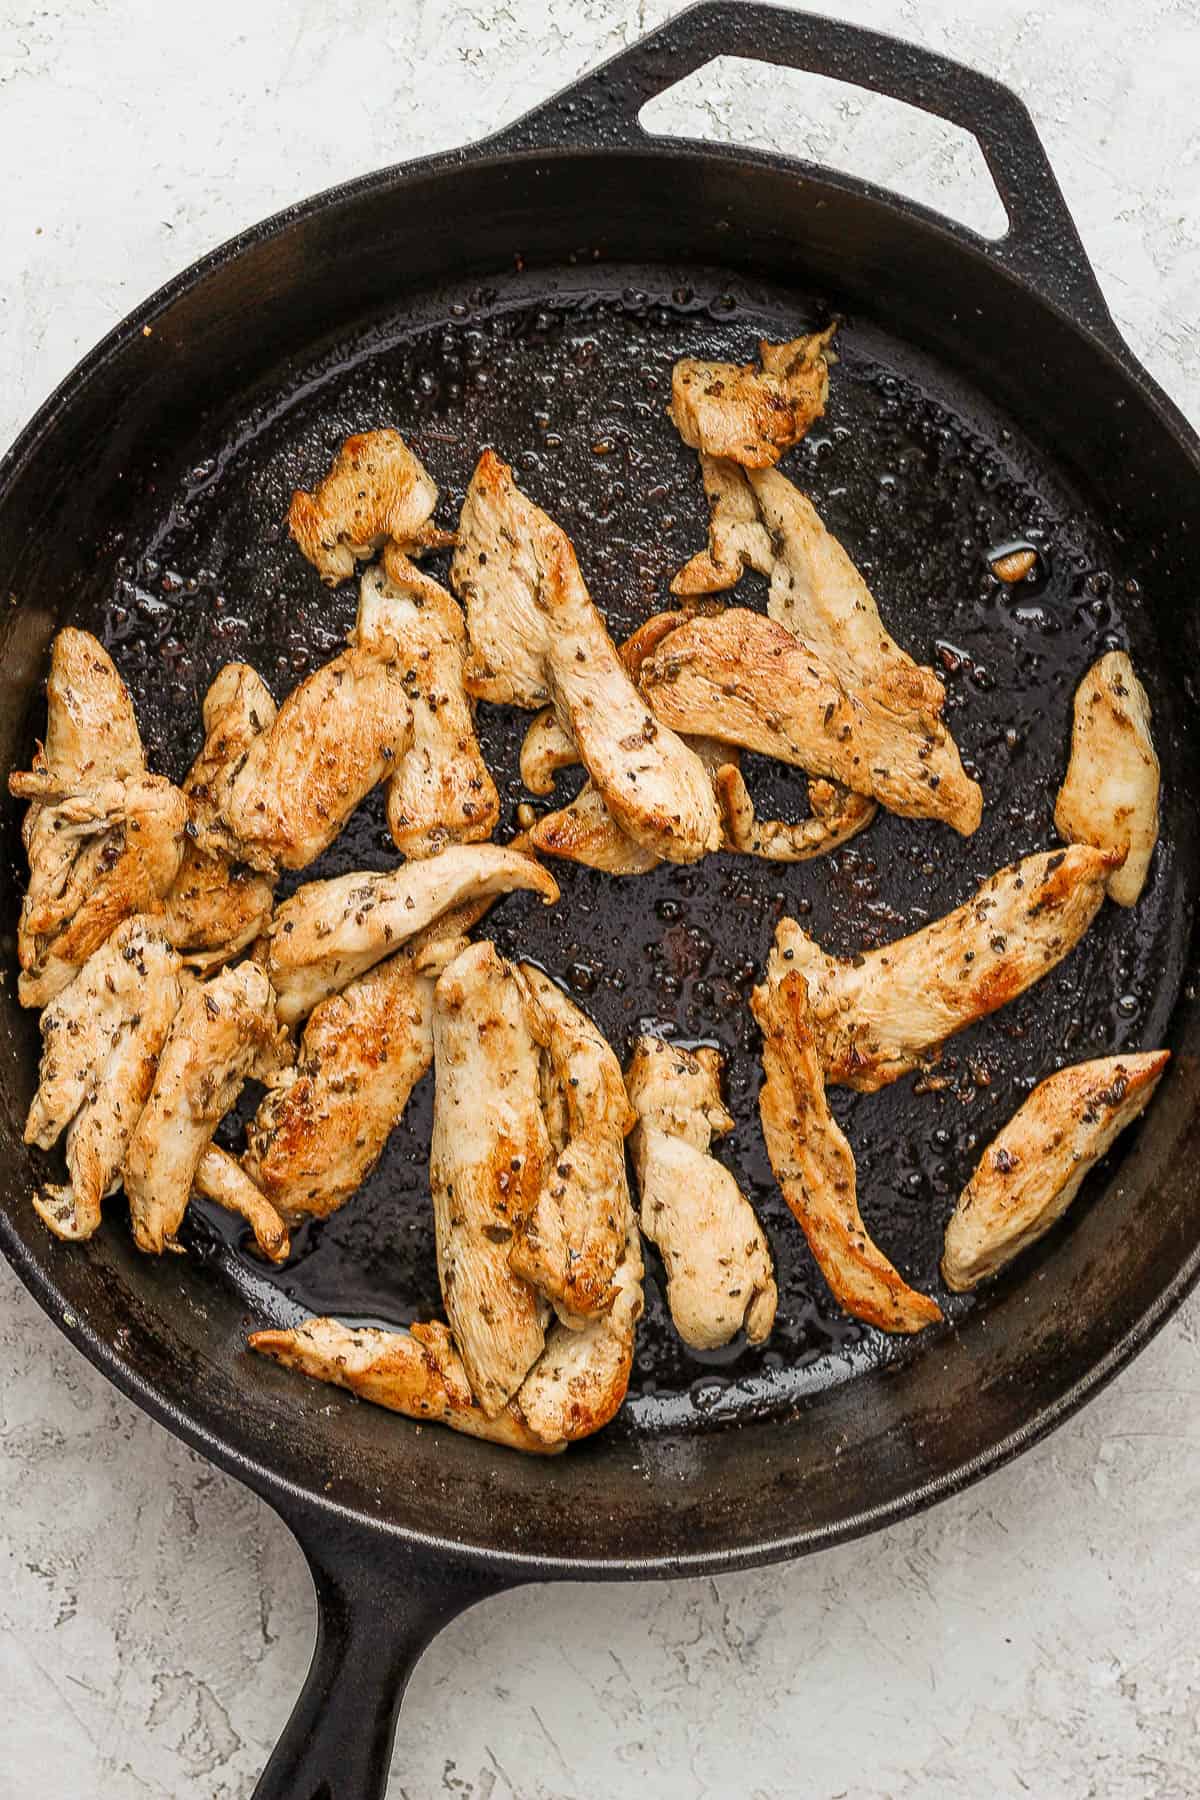 Marinated chicken tenders cooking in a large cast iron skillet.